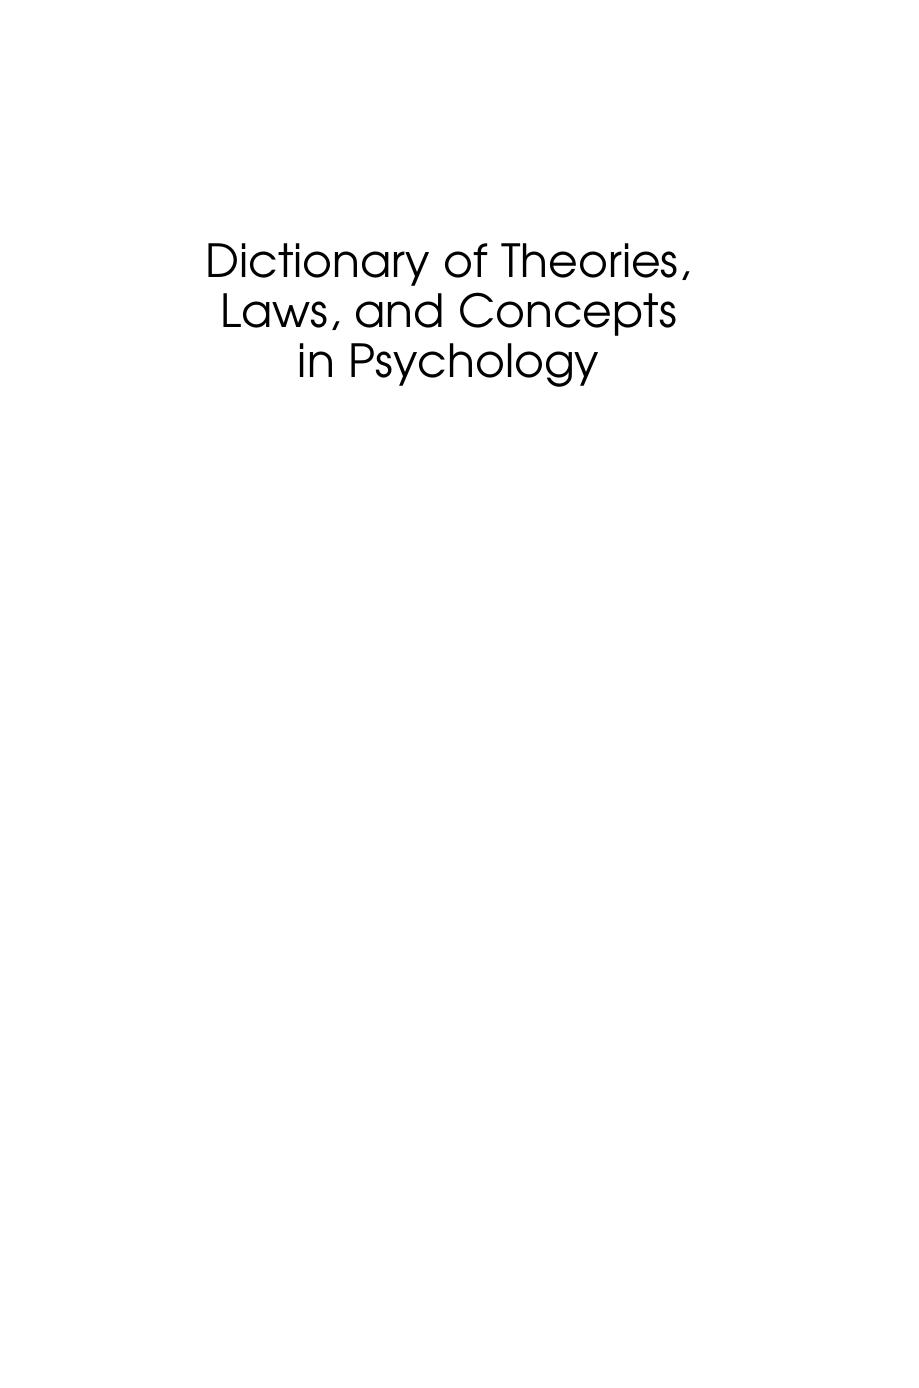 Dictionary of Theories, Laws & Concepts in Psychology